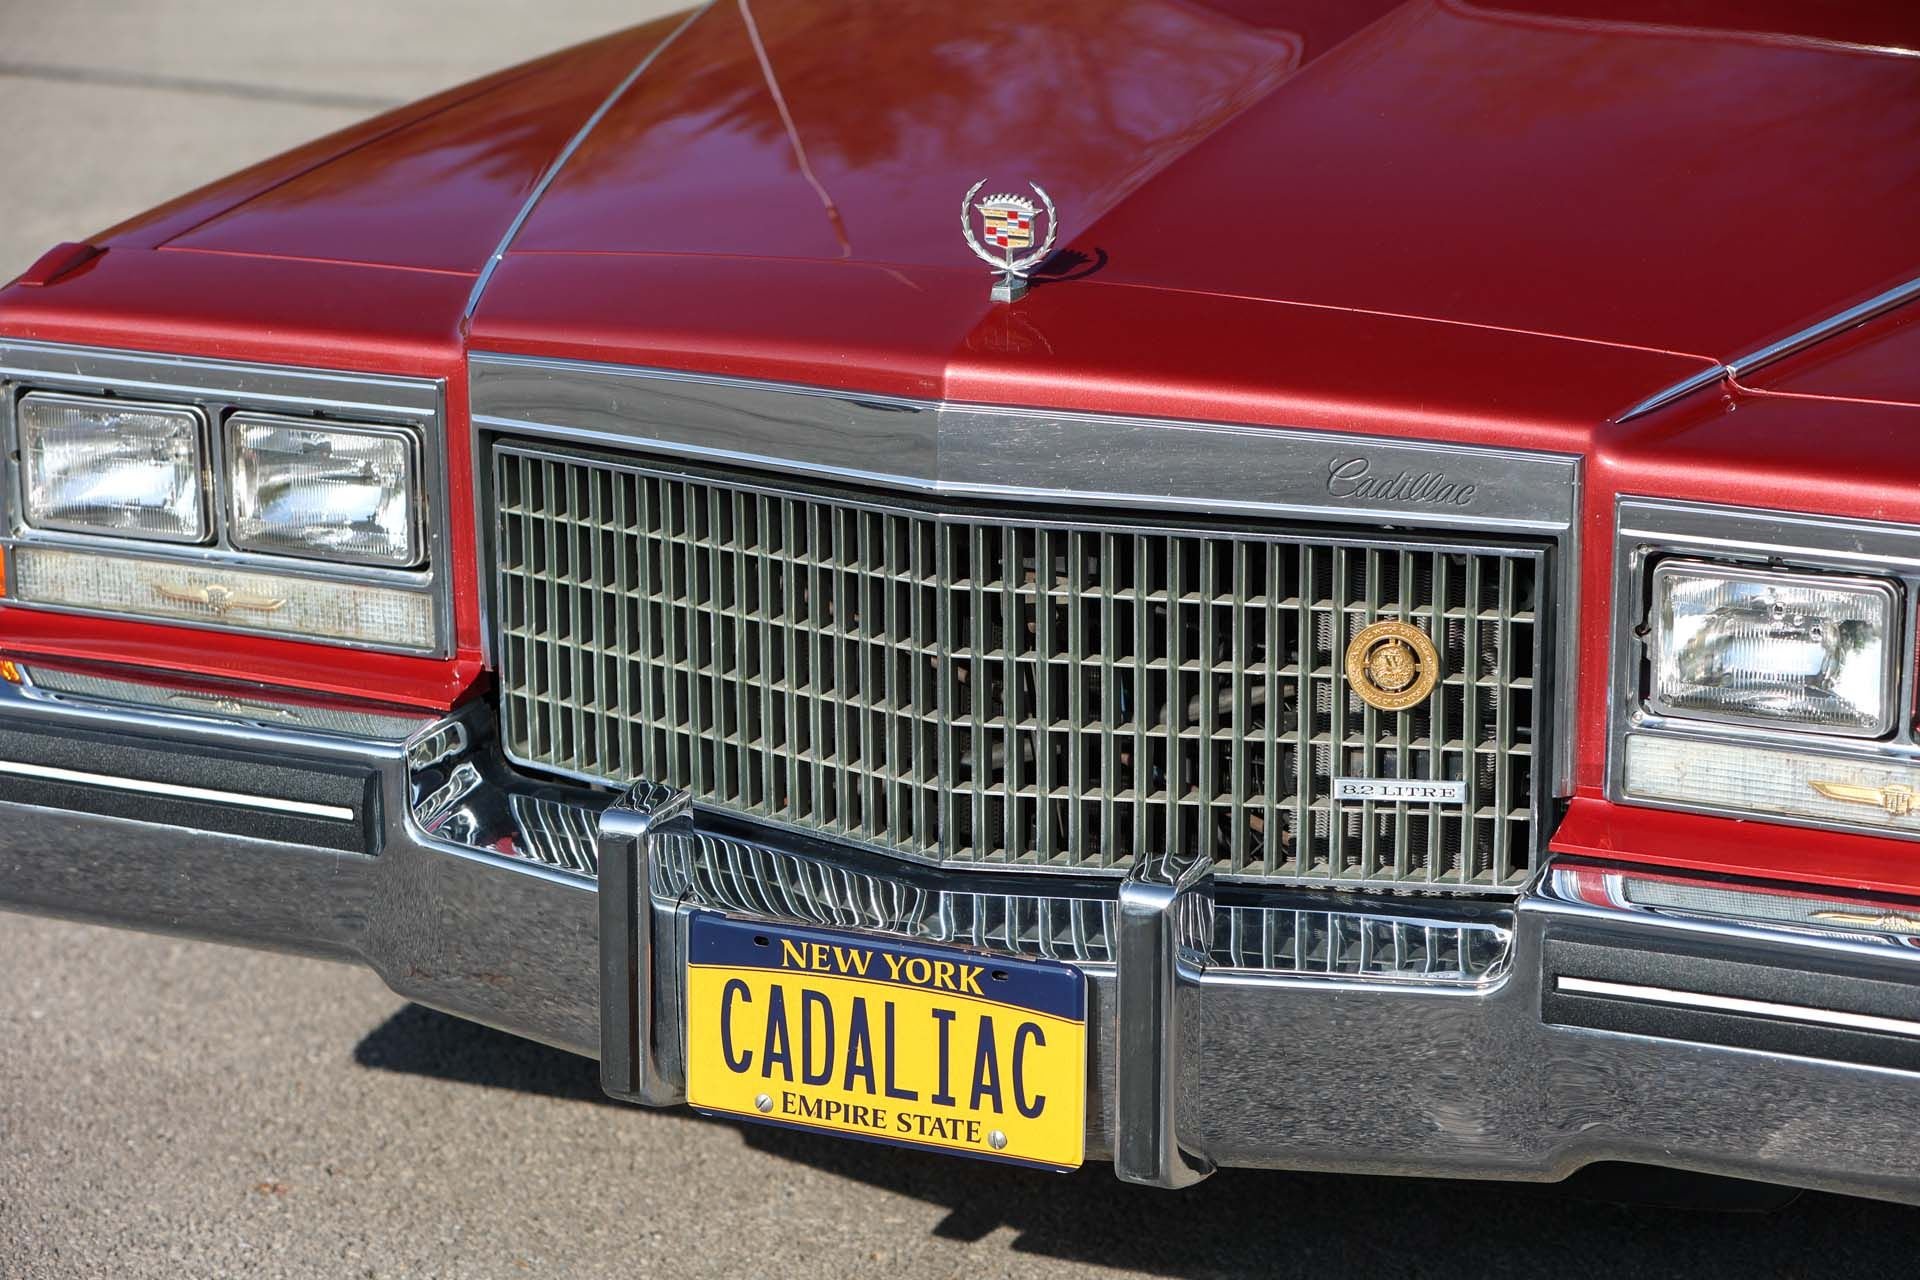 For Sale 1980 Cadillac Fleetwood Brougham d'Elegance '500 Cubic Inch'